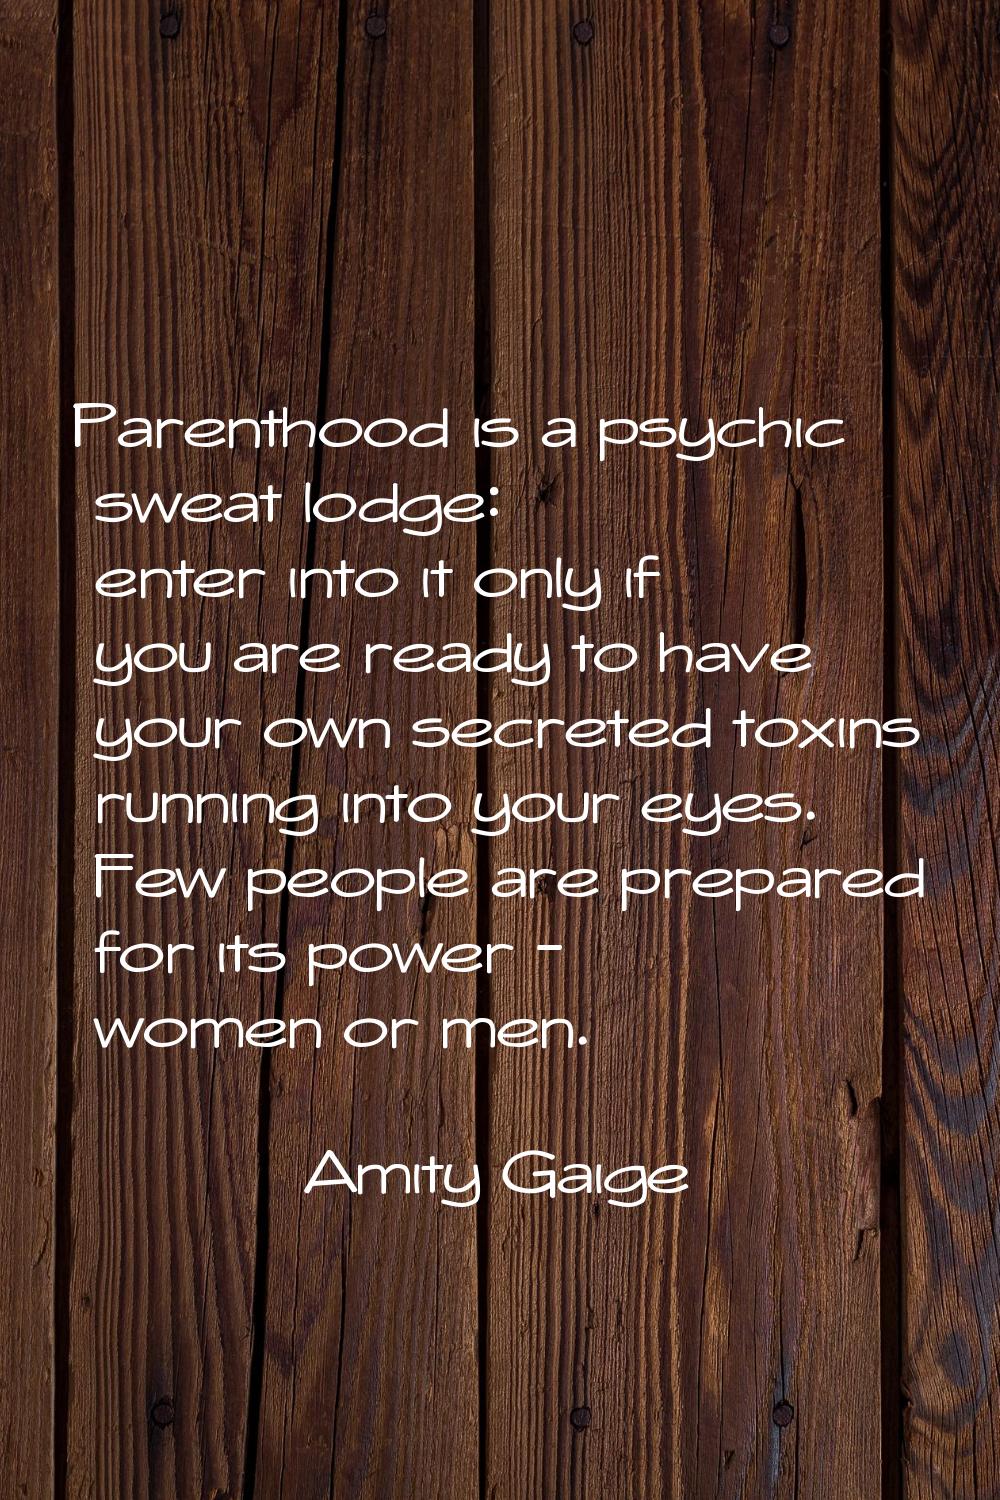 Parenthood is a psychic sweat lodge: enter into it only if you are ready to have your own secreted 